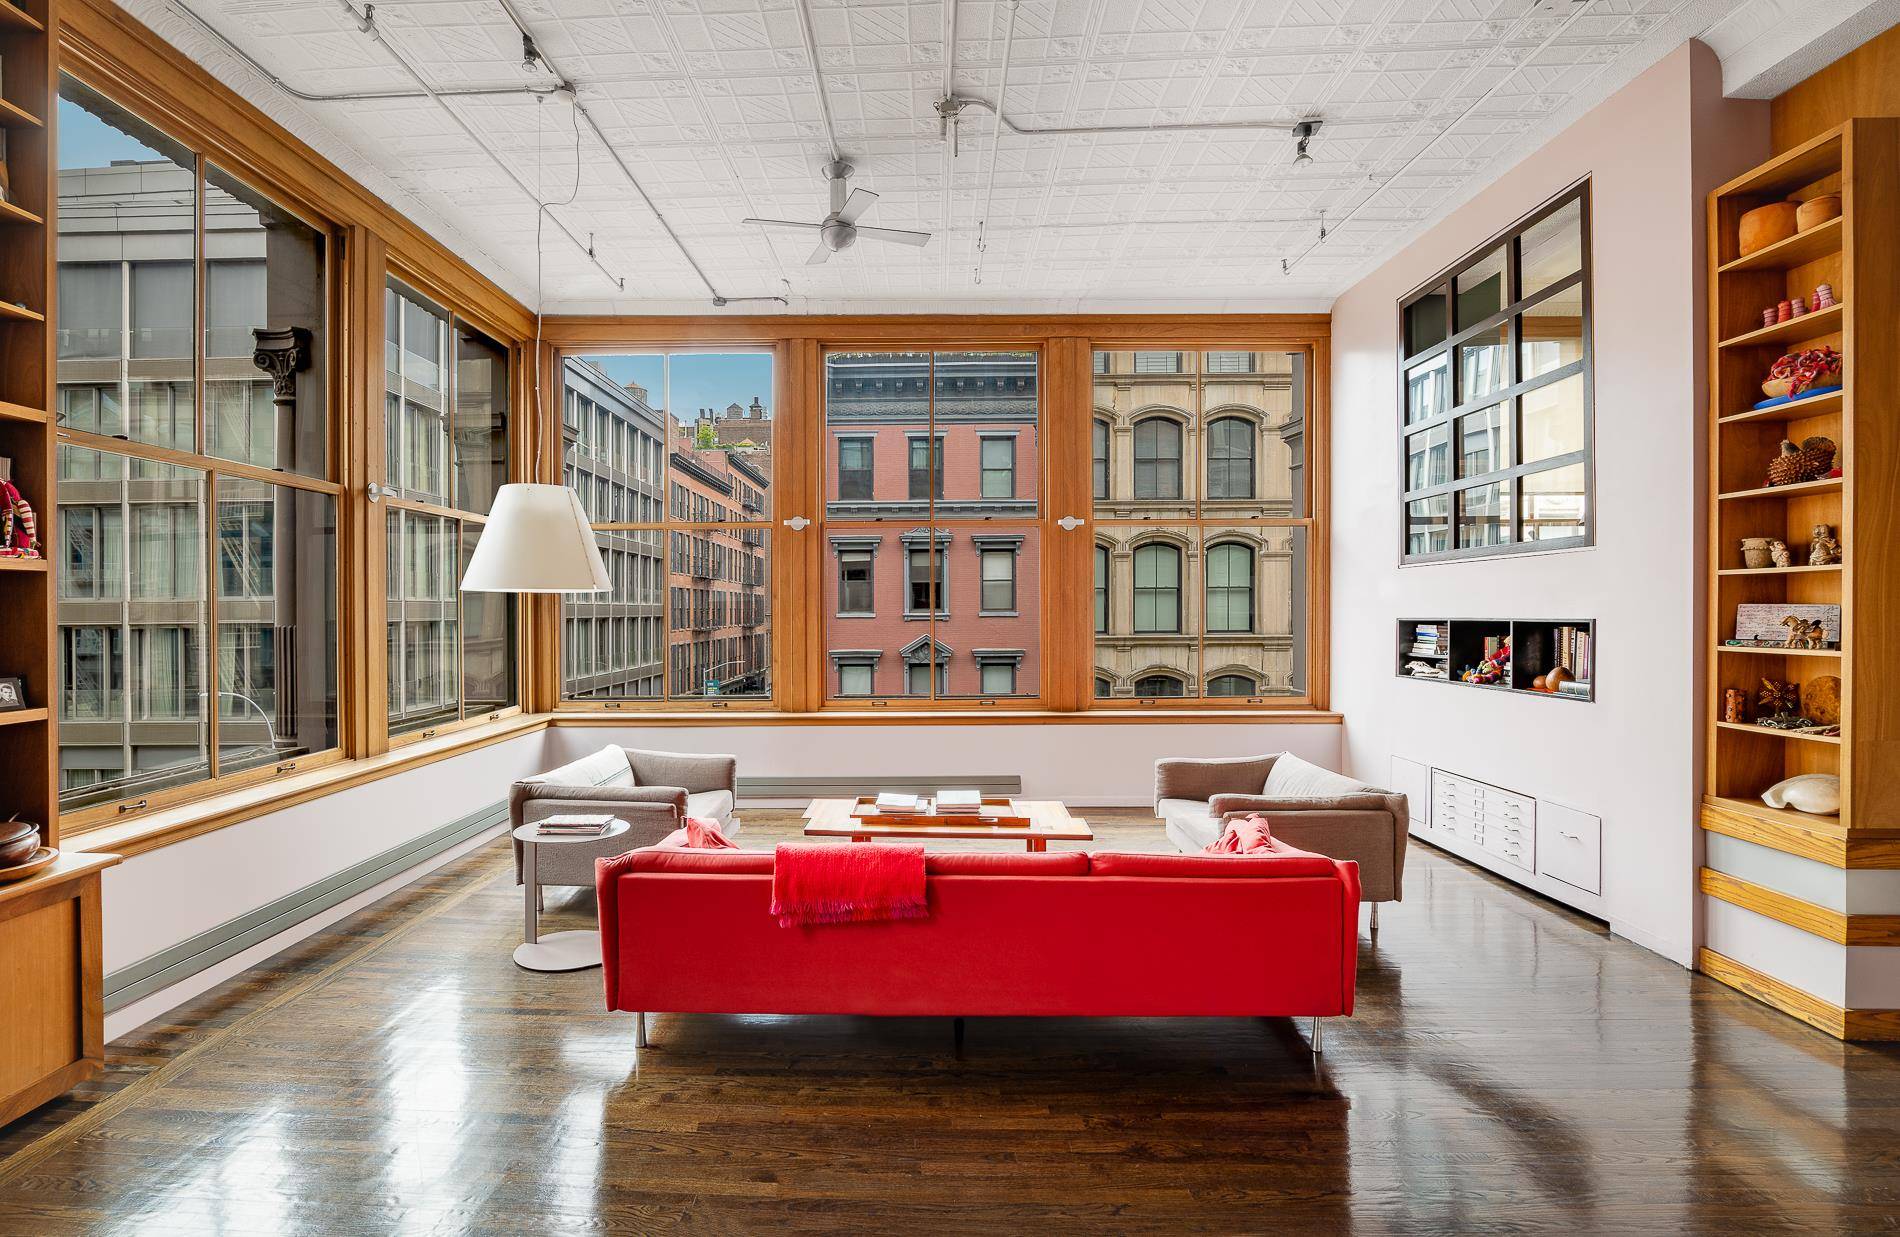 This dramatic corner condominium loft radiates true SoHo character and magnificence with soaring ceilings of over 13 feet and breathtaking volume and scale.